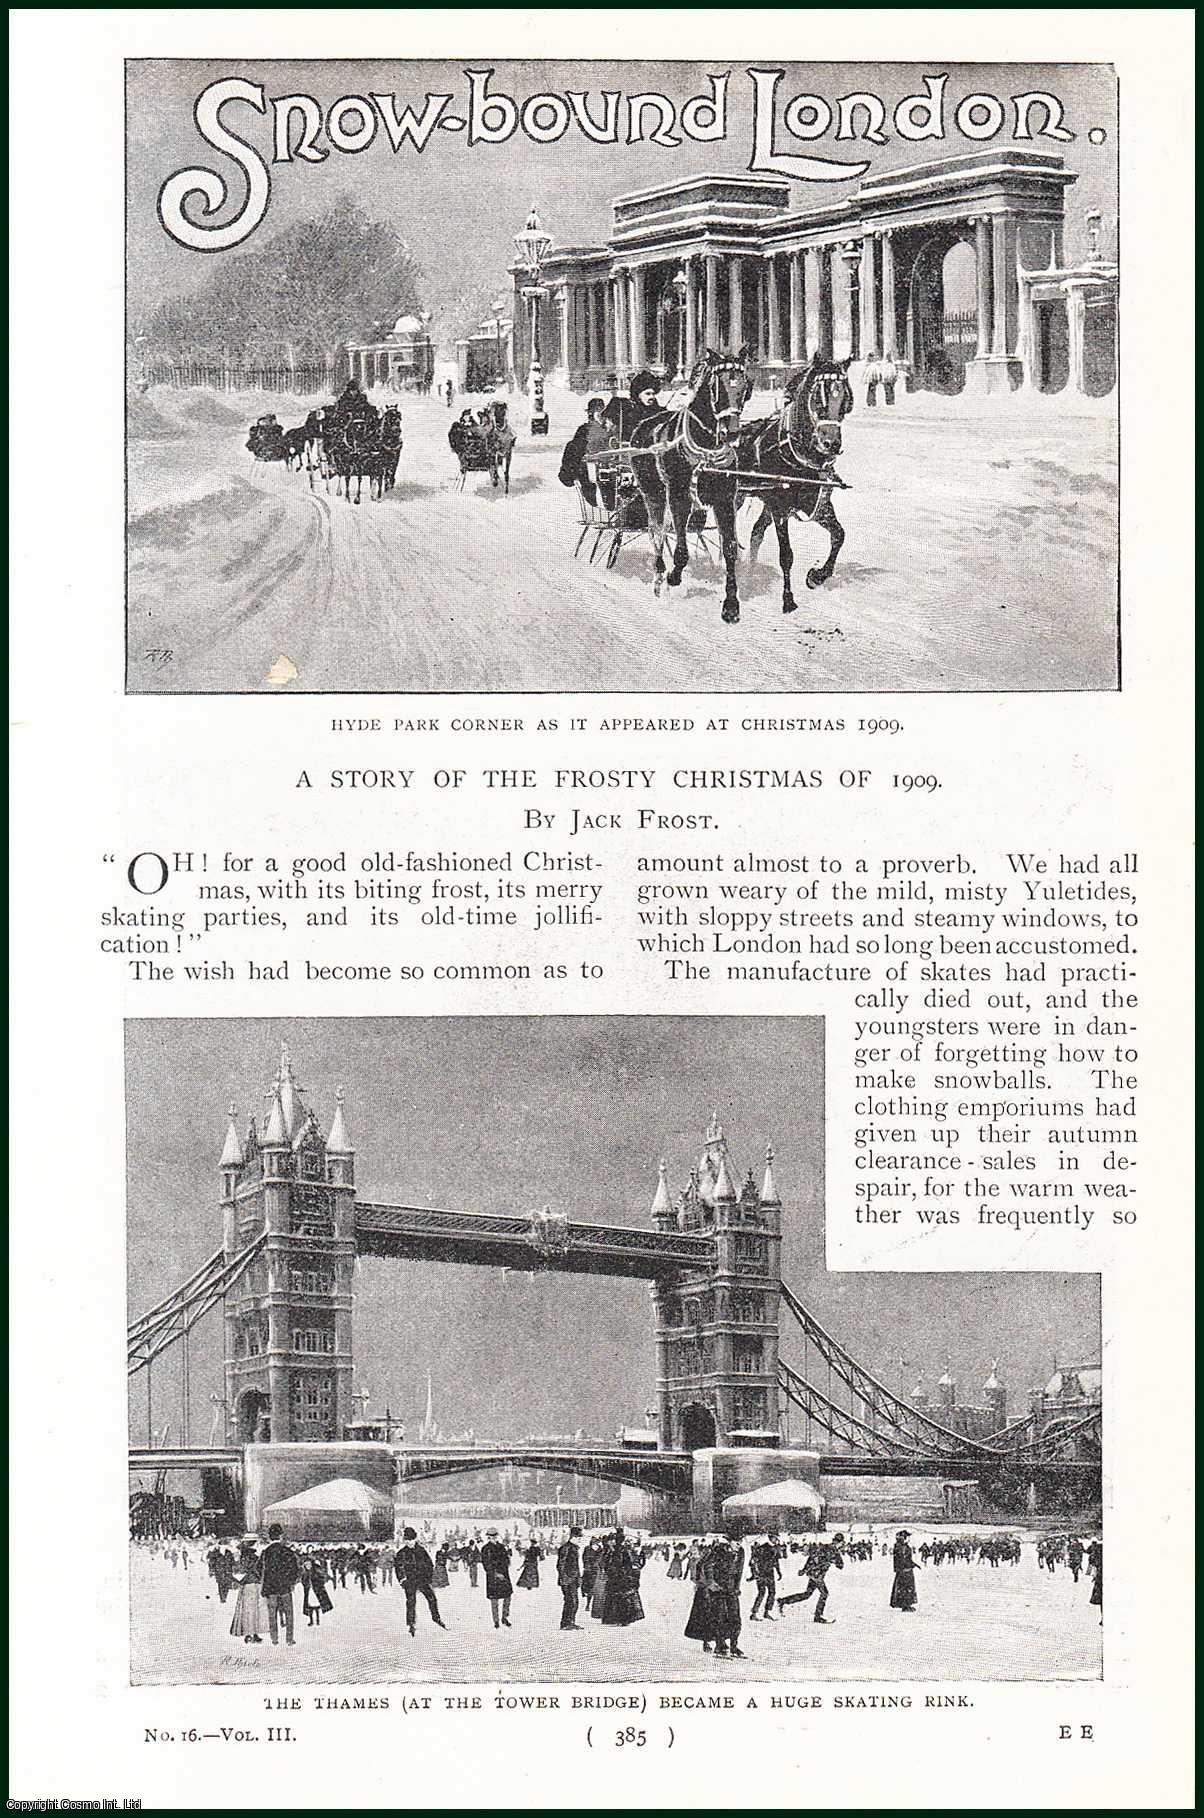 Jack Frost - Snow-Bound London. A Story of the Frosty Christmas of 1909. An uncommon original article from the Harmsworth London Magazine, 1900.